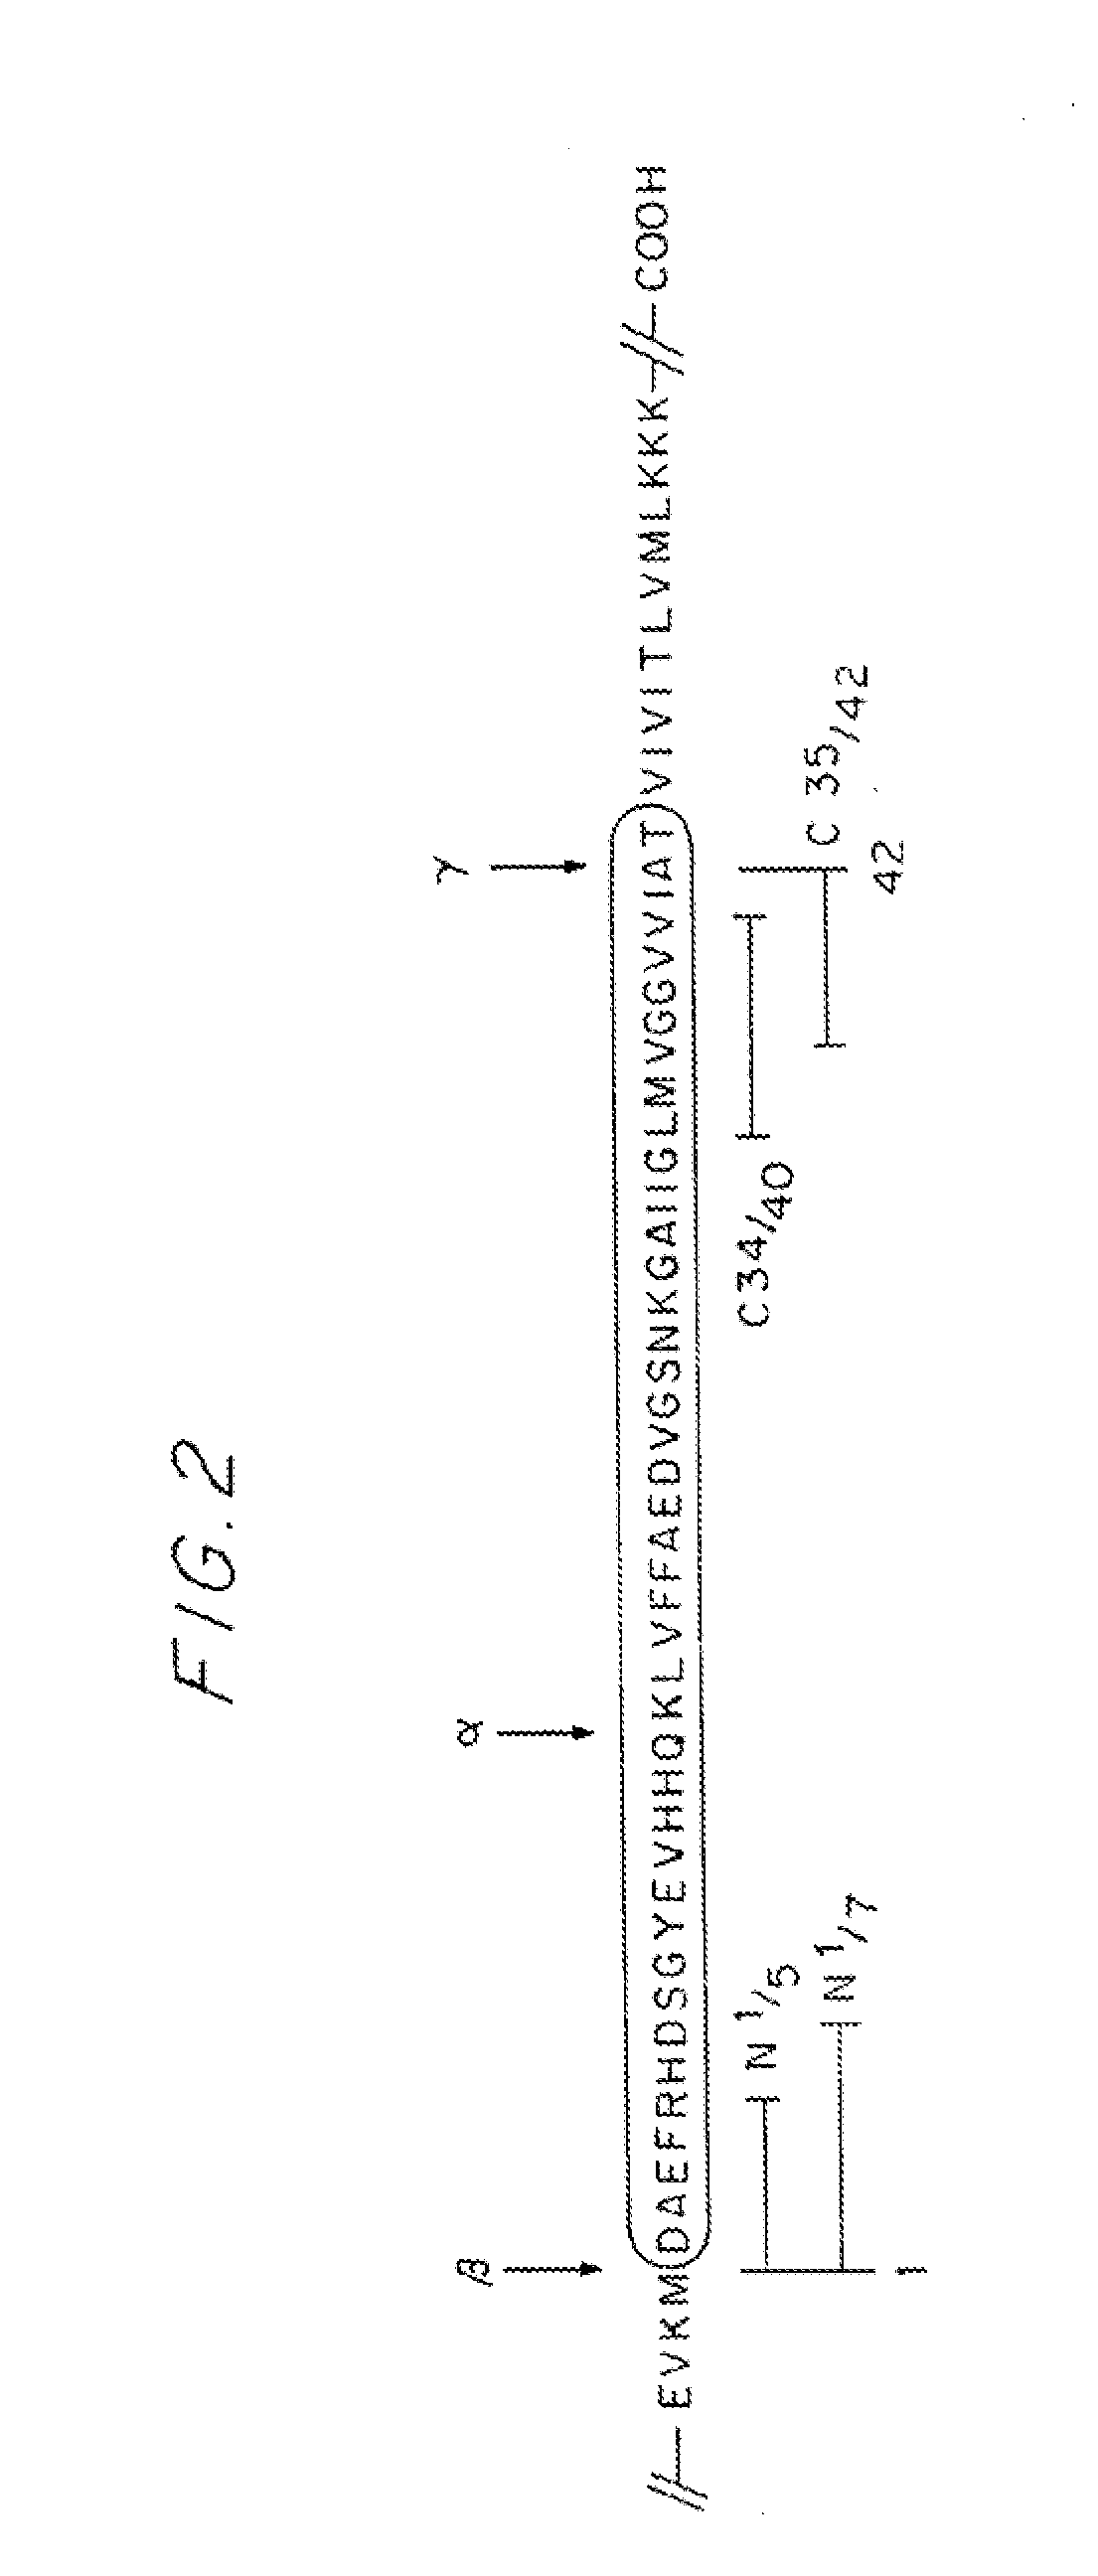 Recombinant antibodies specific for beta-amyloid ends, DNA encoding and methods of use thereof